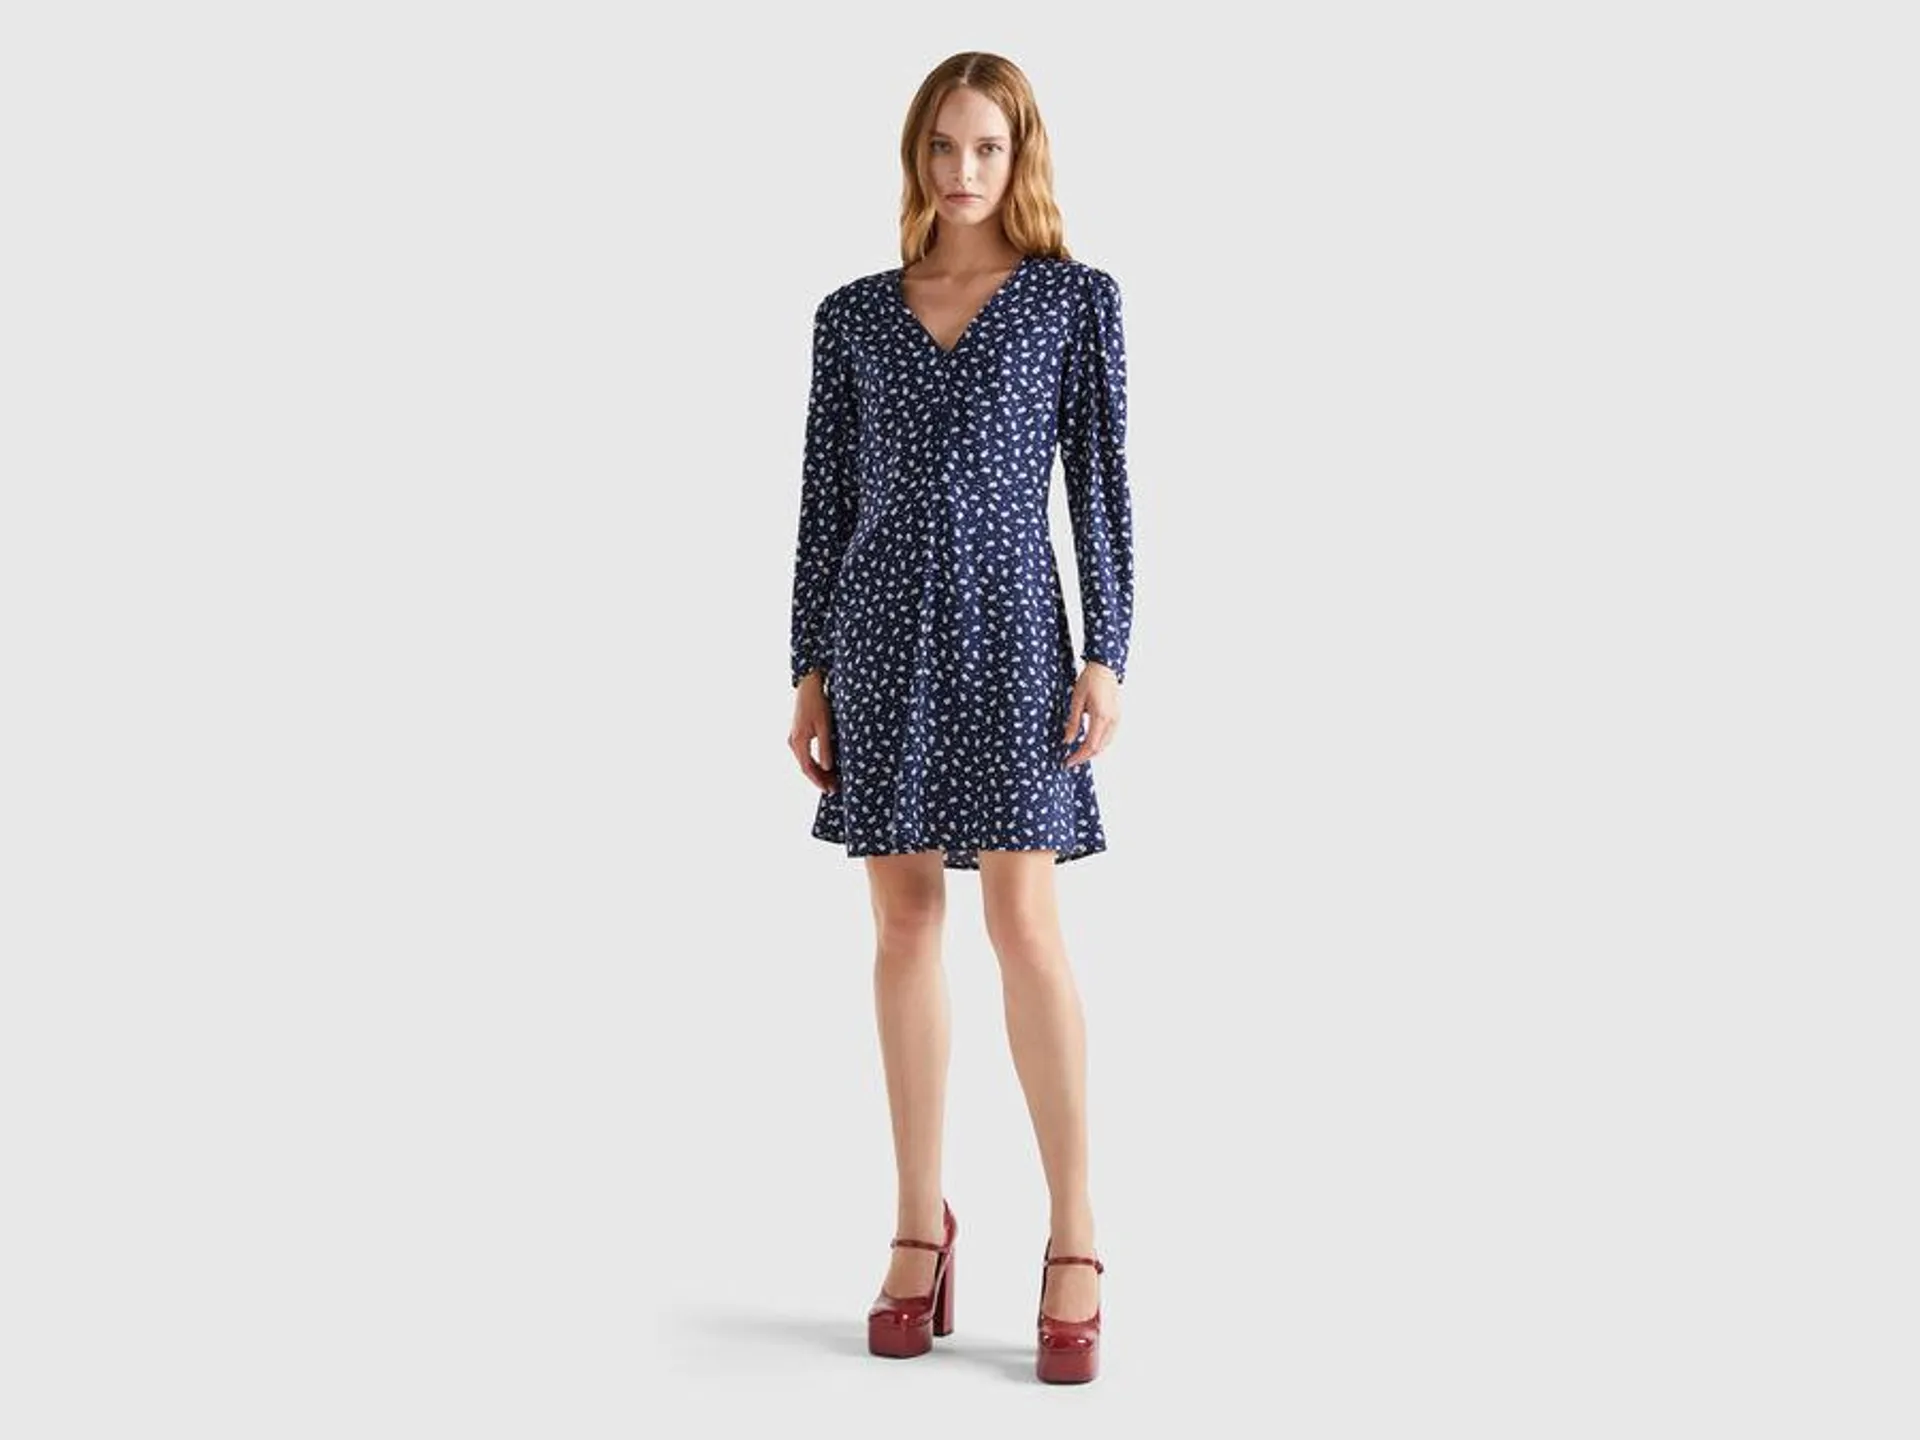 Patterned dress in sustainable viscose